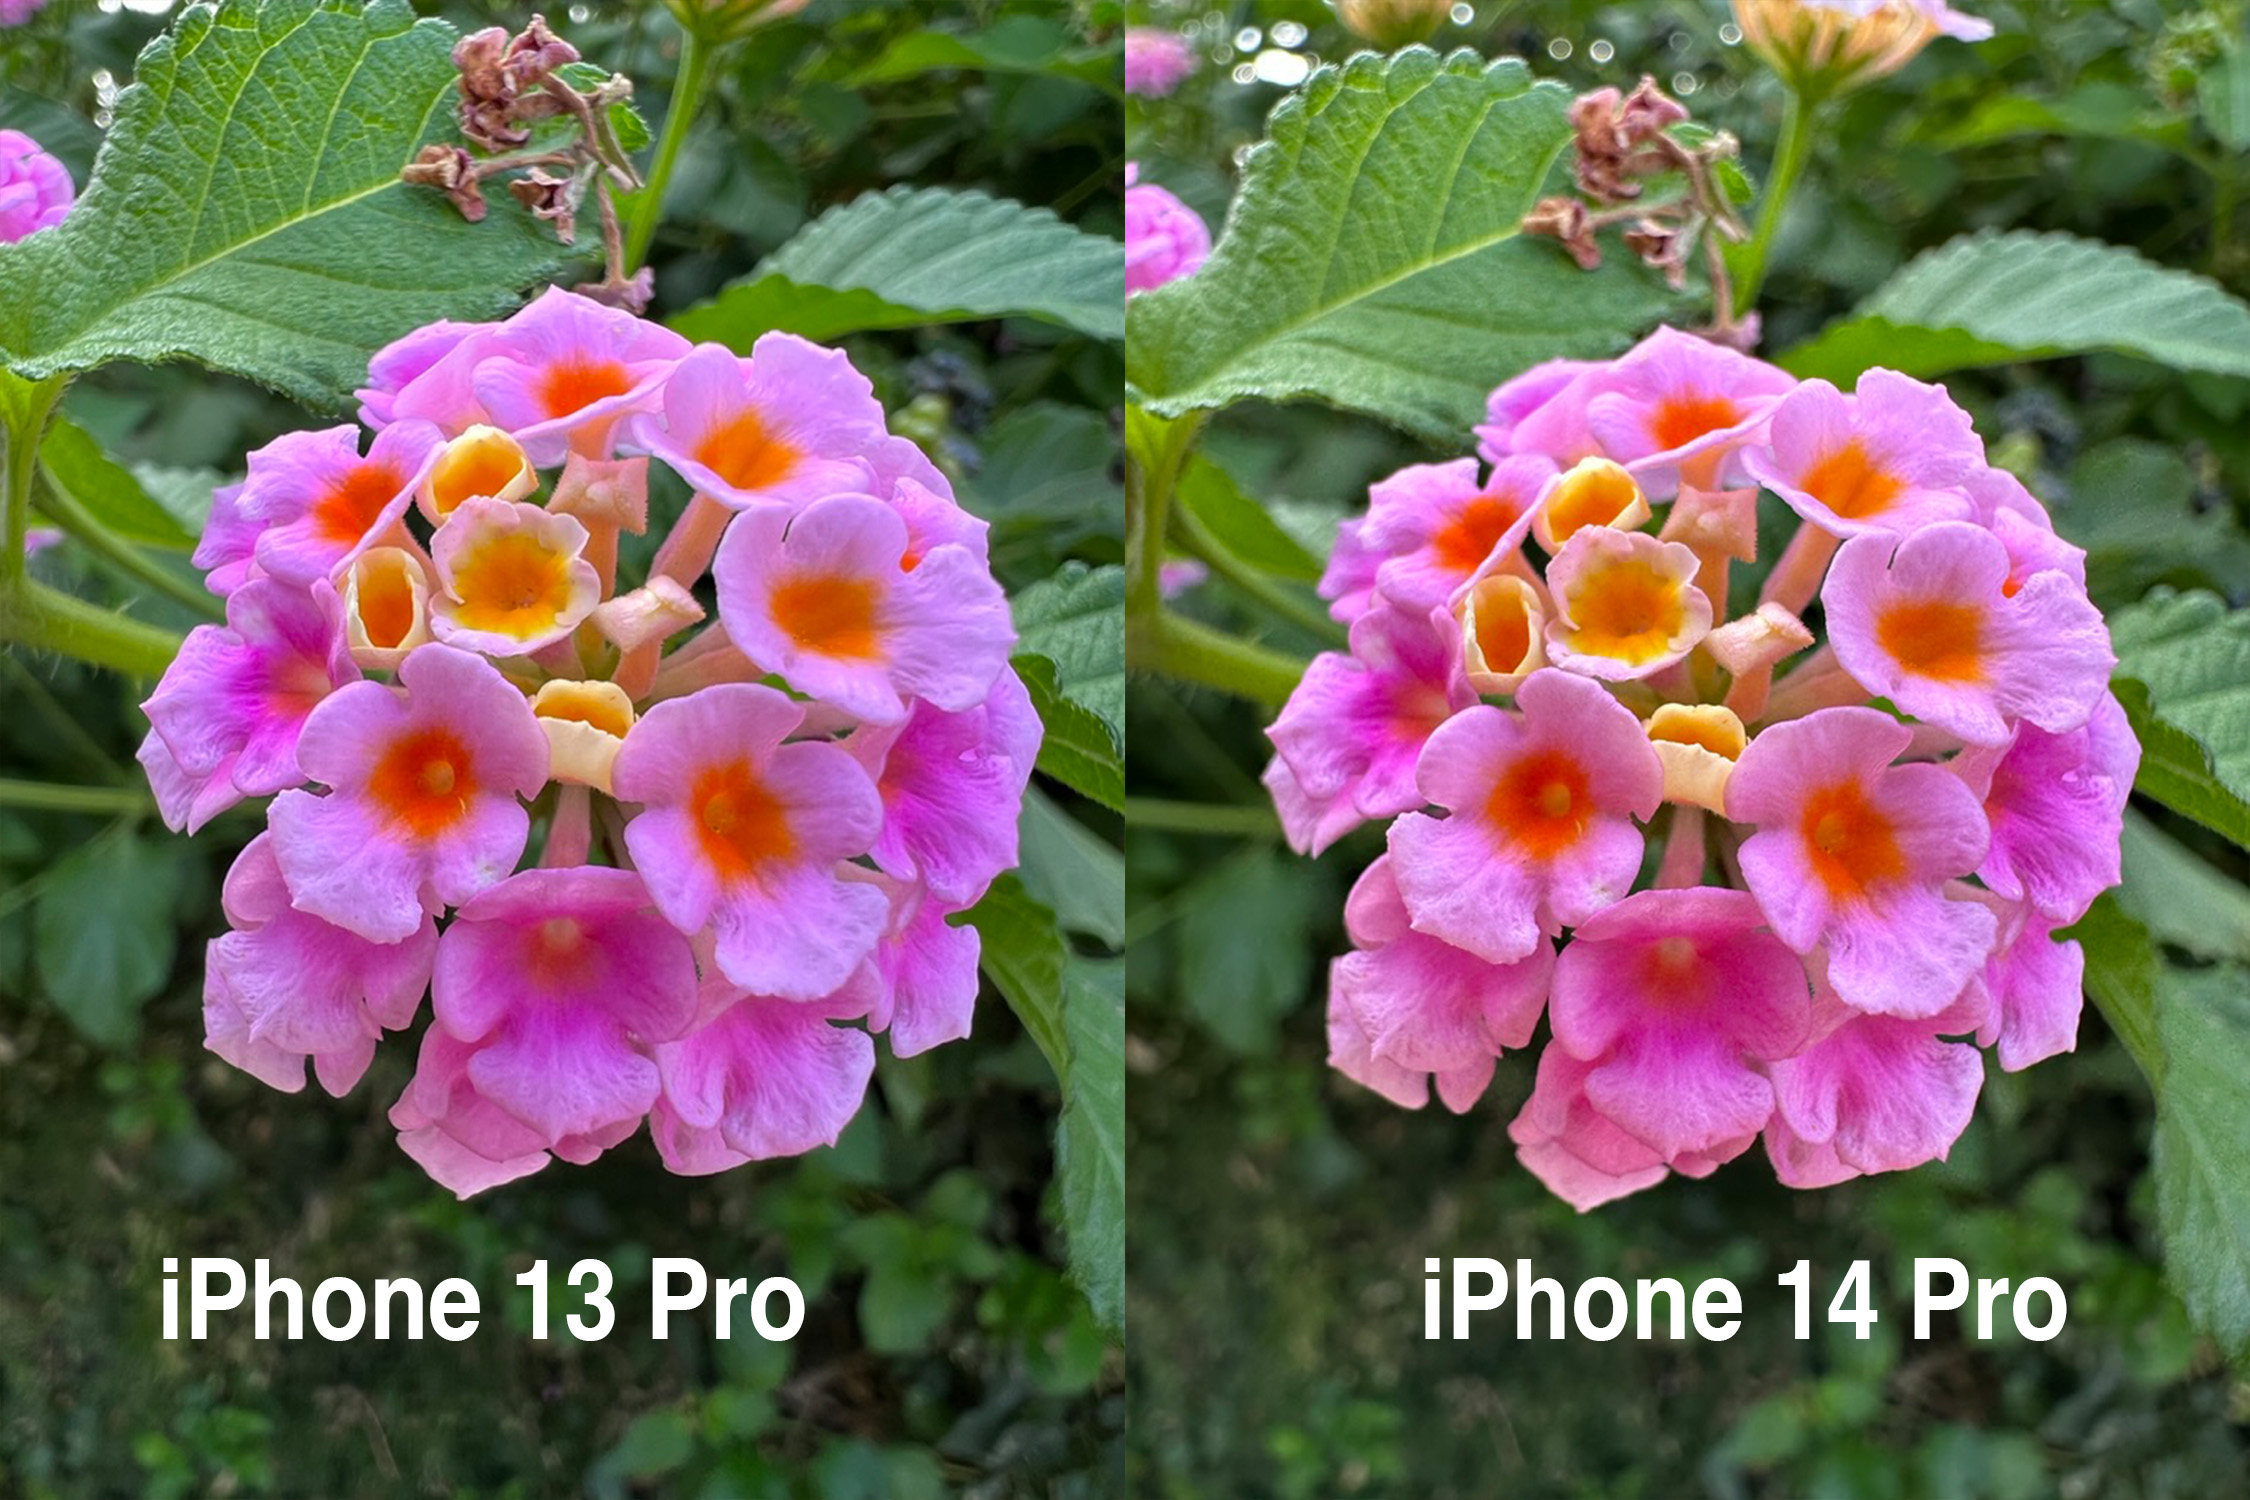 comparison shot of iPhone 13 pro and iPhone 14 pro detail shot of flower